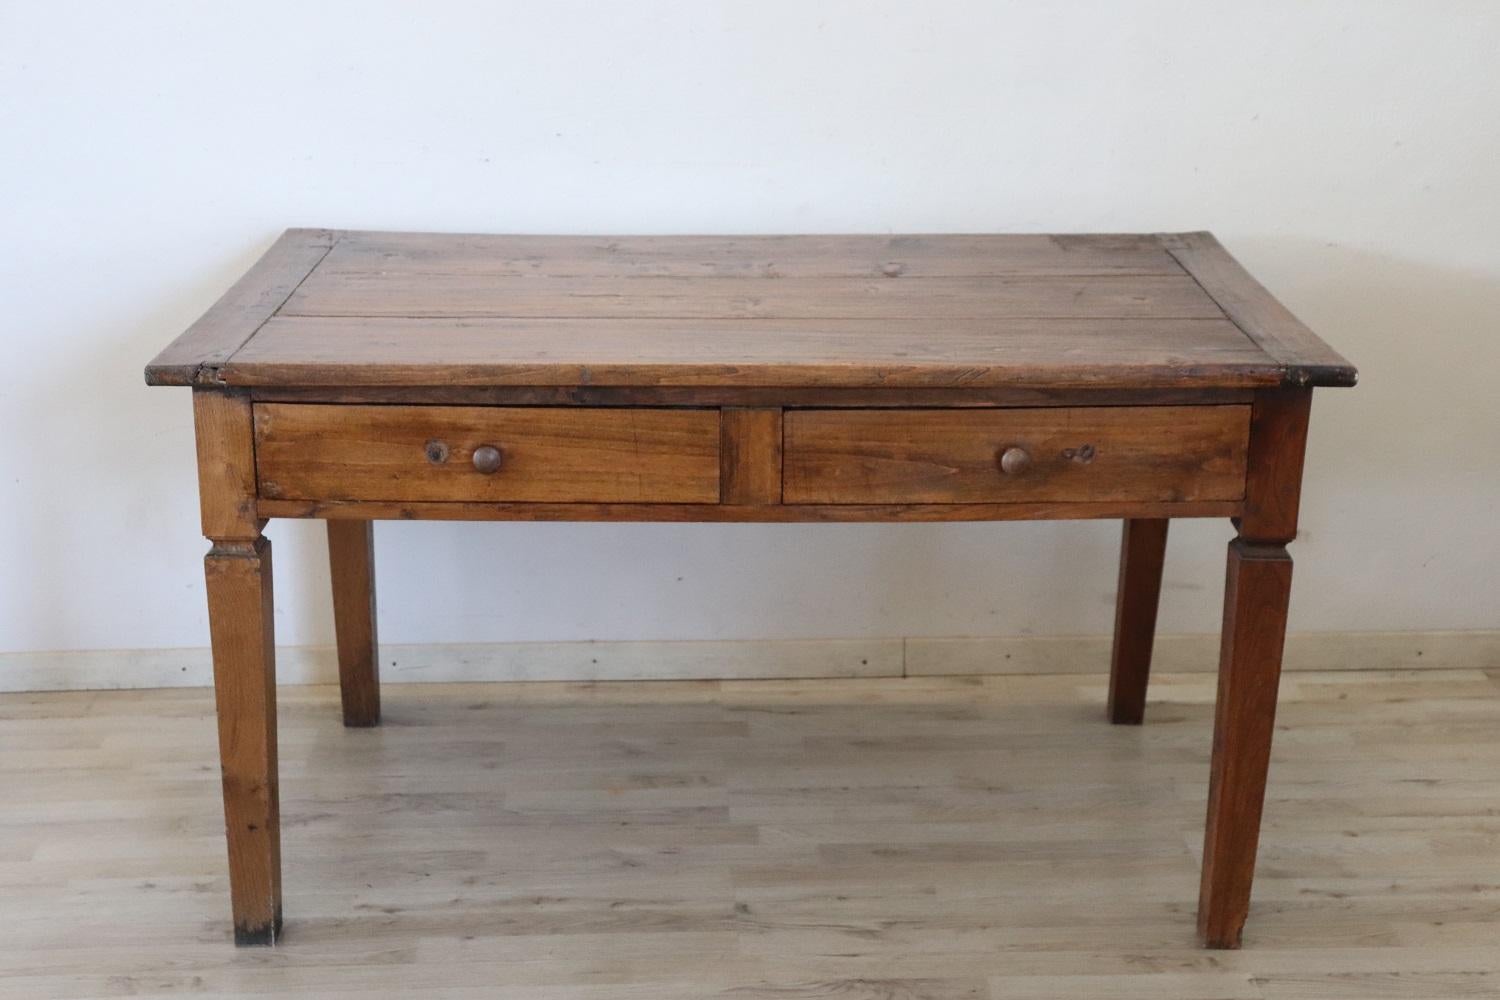 Beautiful very nice Italian solid poplar and oak wood kitchen table, 1850s. The table is very simple and linear, characterized by solid legs. Equipped with a two large drawers. This rustic table is perfect for a country home and can be used in a